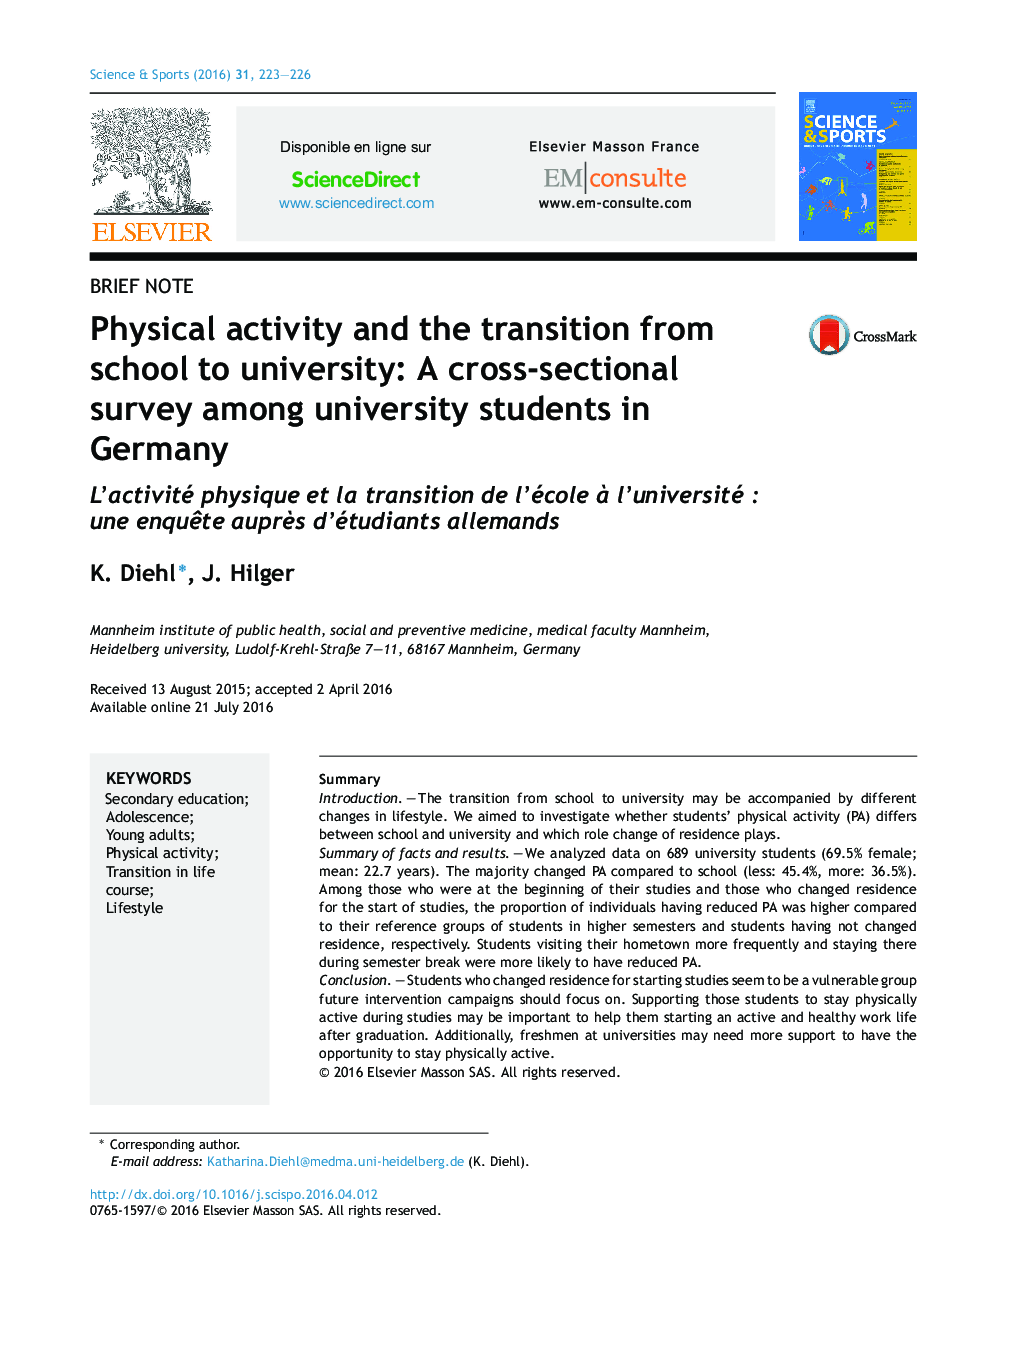 Physical activity and the transition from school to university: A cross-sectional survey among university students in Germany